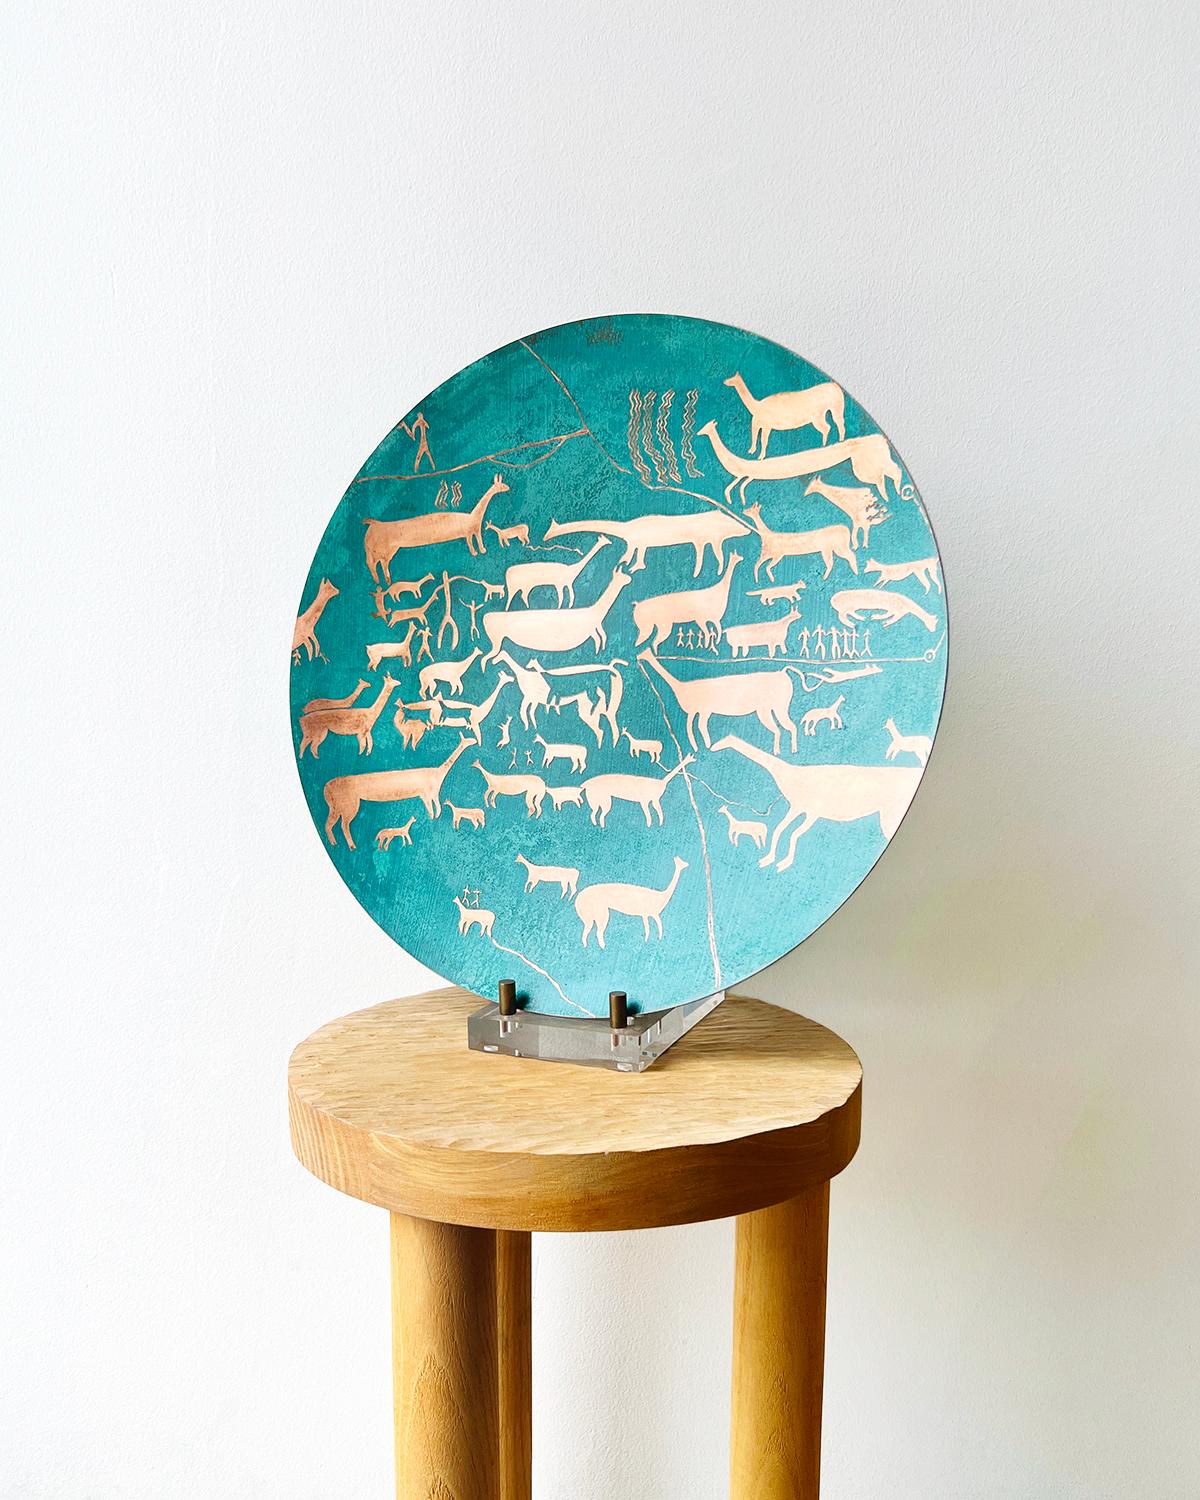 An etched copper platter with green patina
This Chilean Copper Ceremonial Platter is a handmade masterpiece of rustic beauty, featuring traditional etched animal figures and oxidized green patina. It offers an artisanal touch of indigenous art to